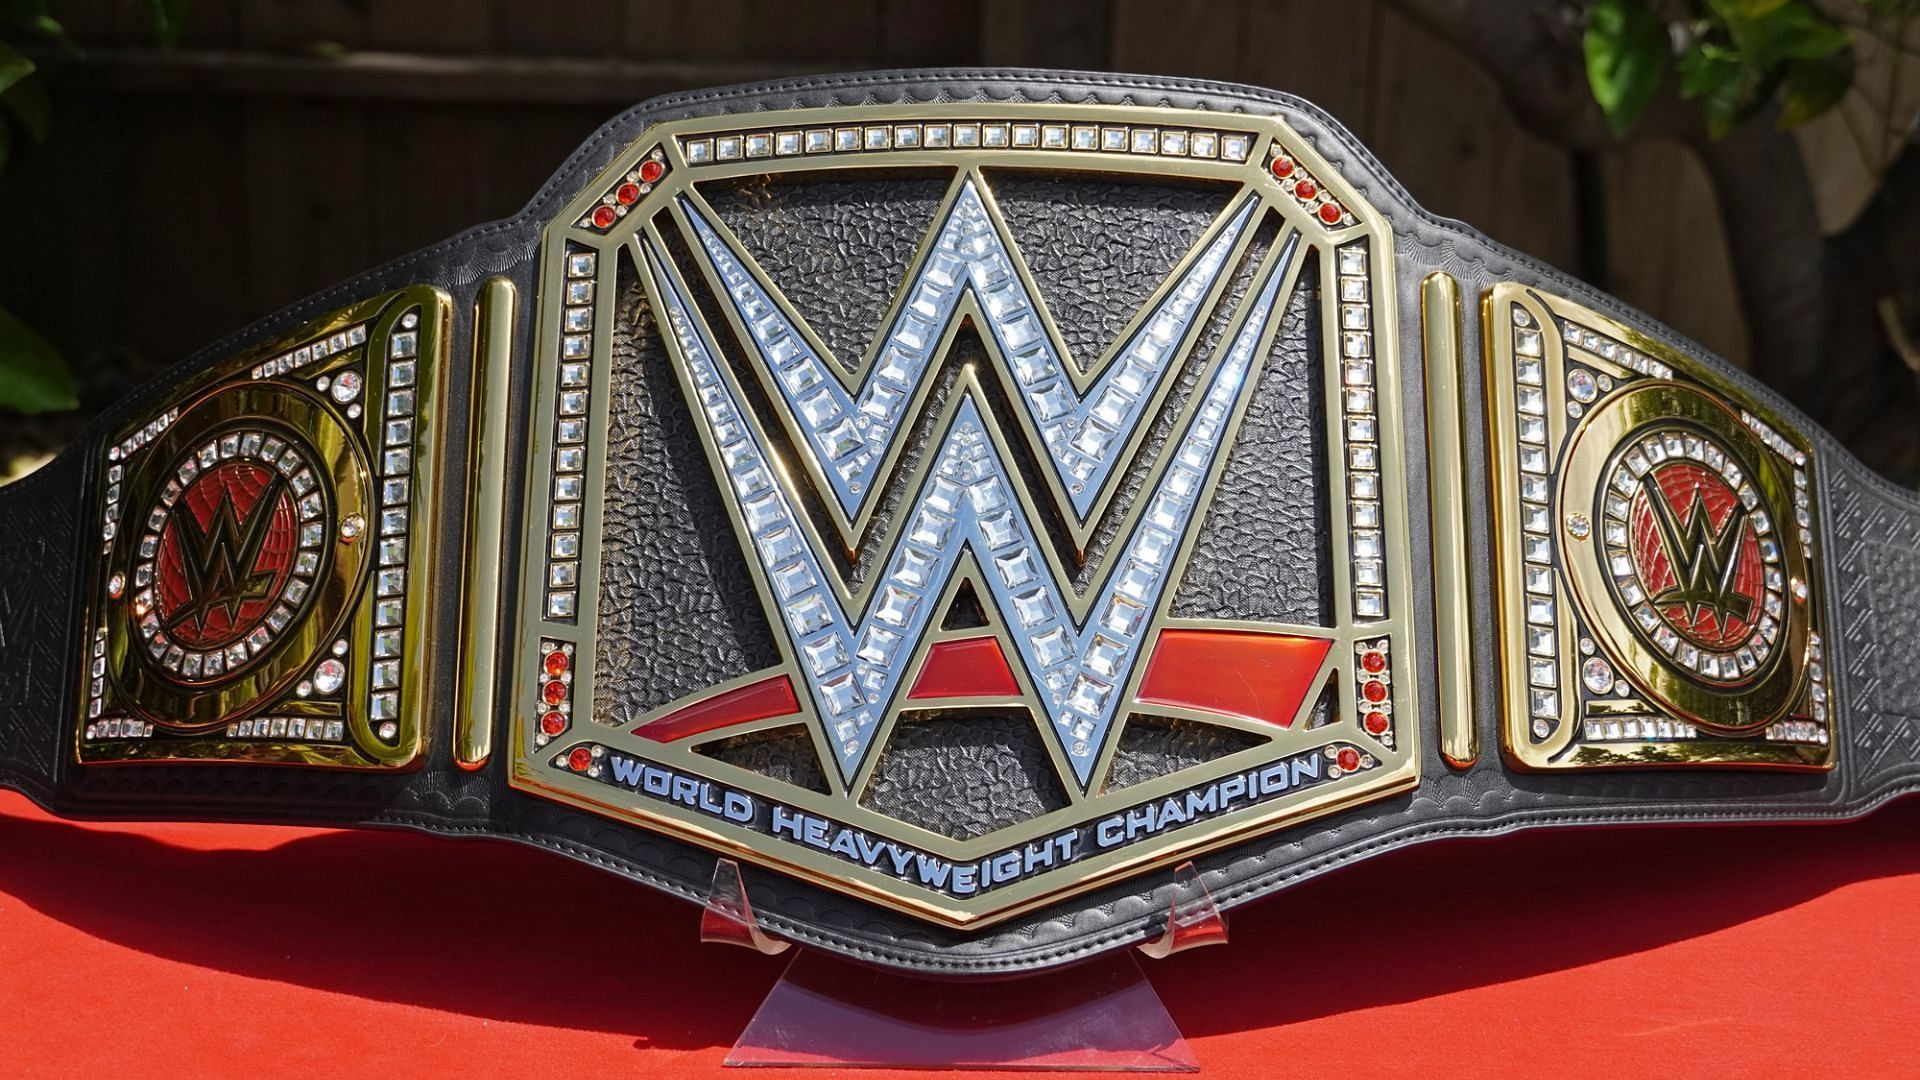 The WWE Championship was held by several top stars of the industry